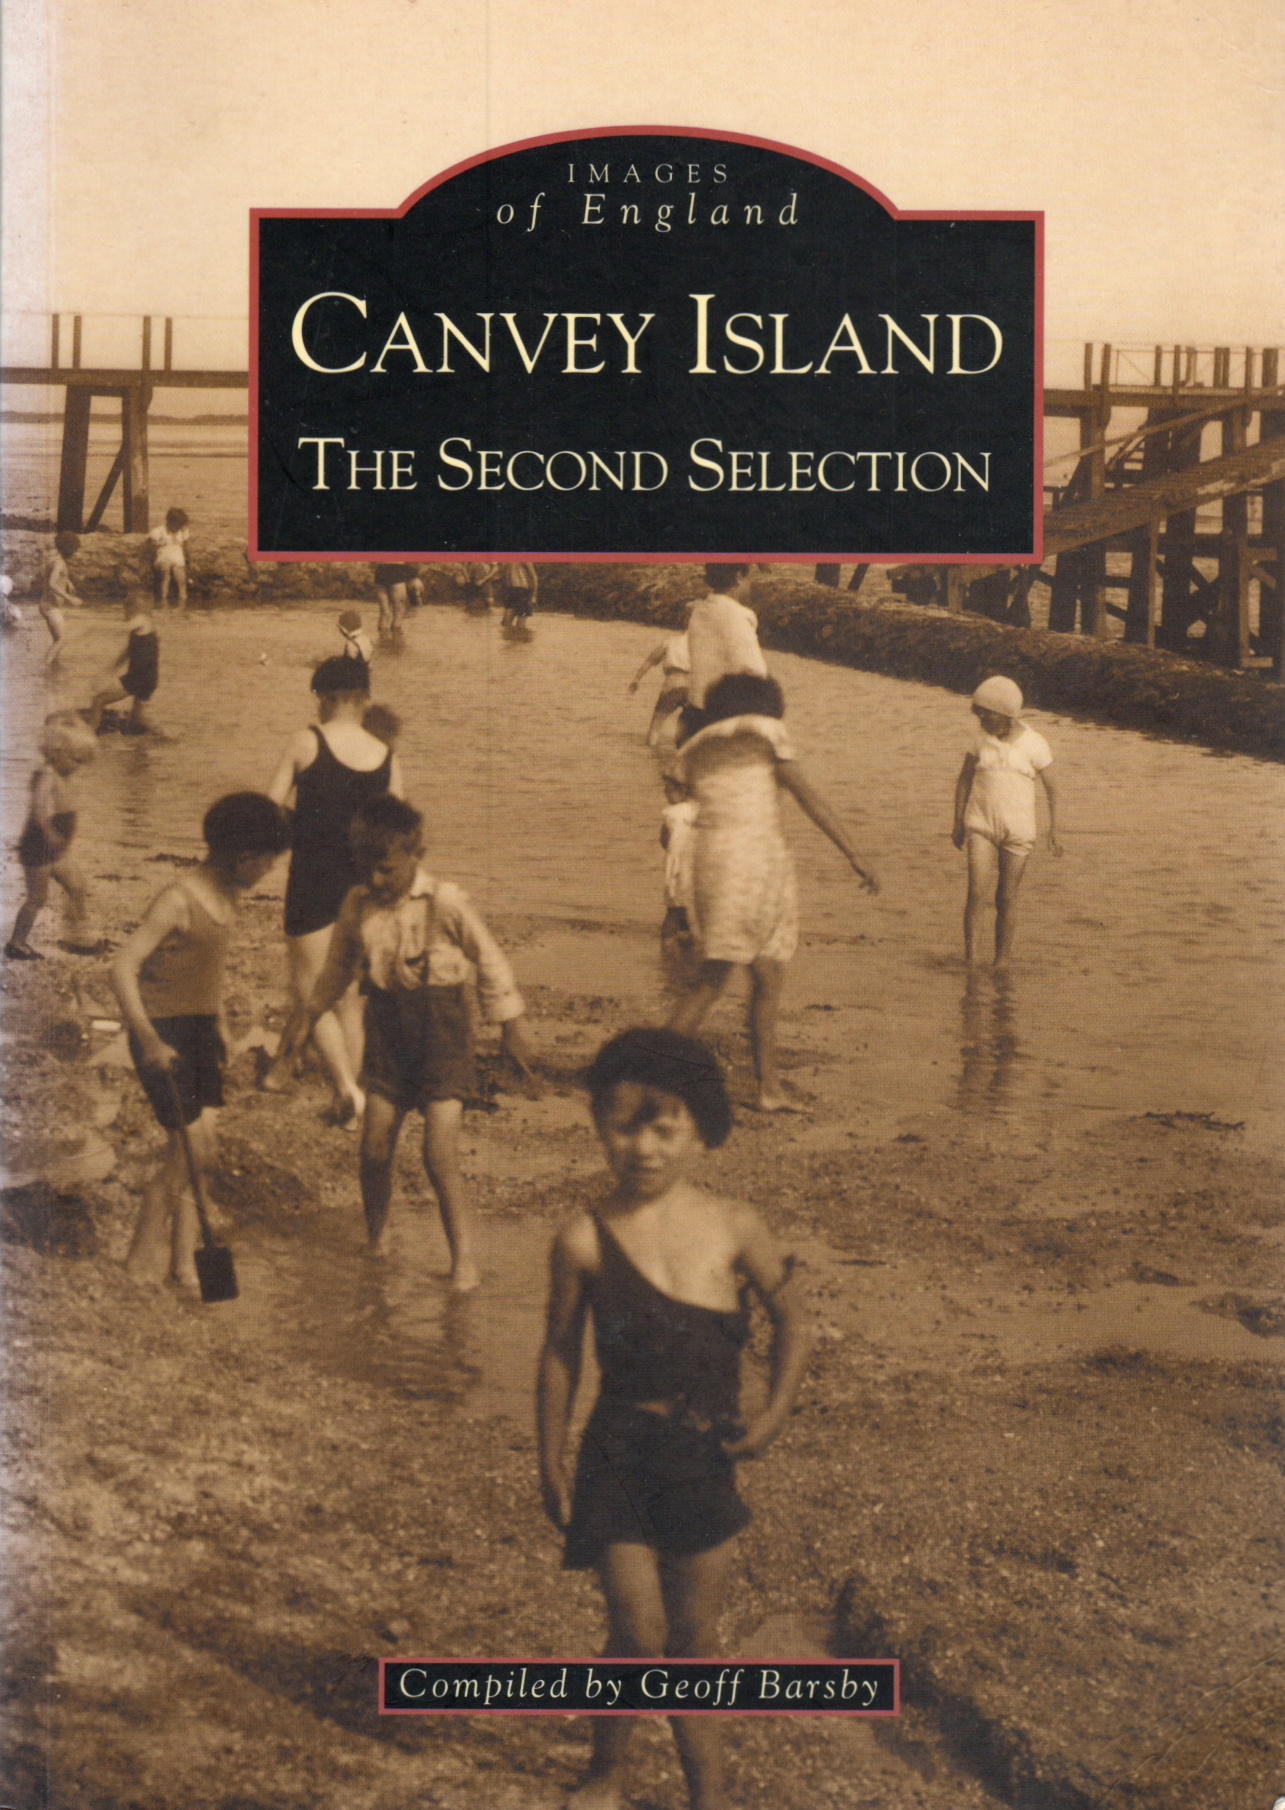 Canvey Island, Essex (2nd Book)